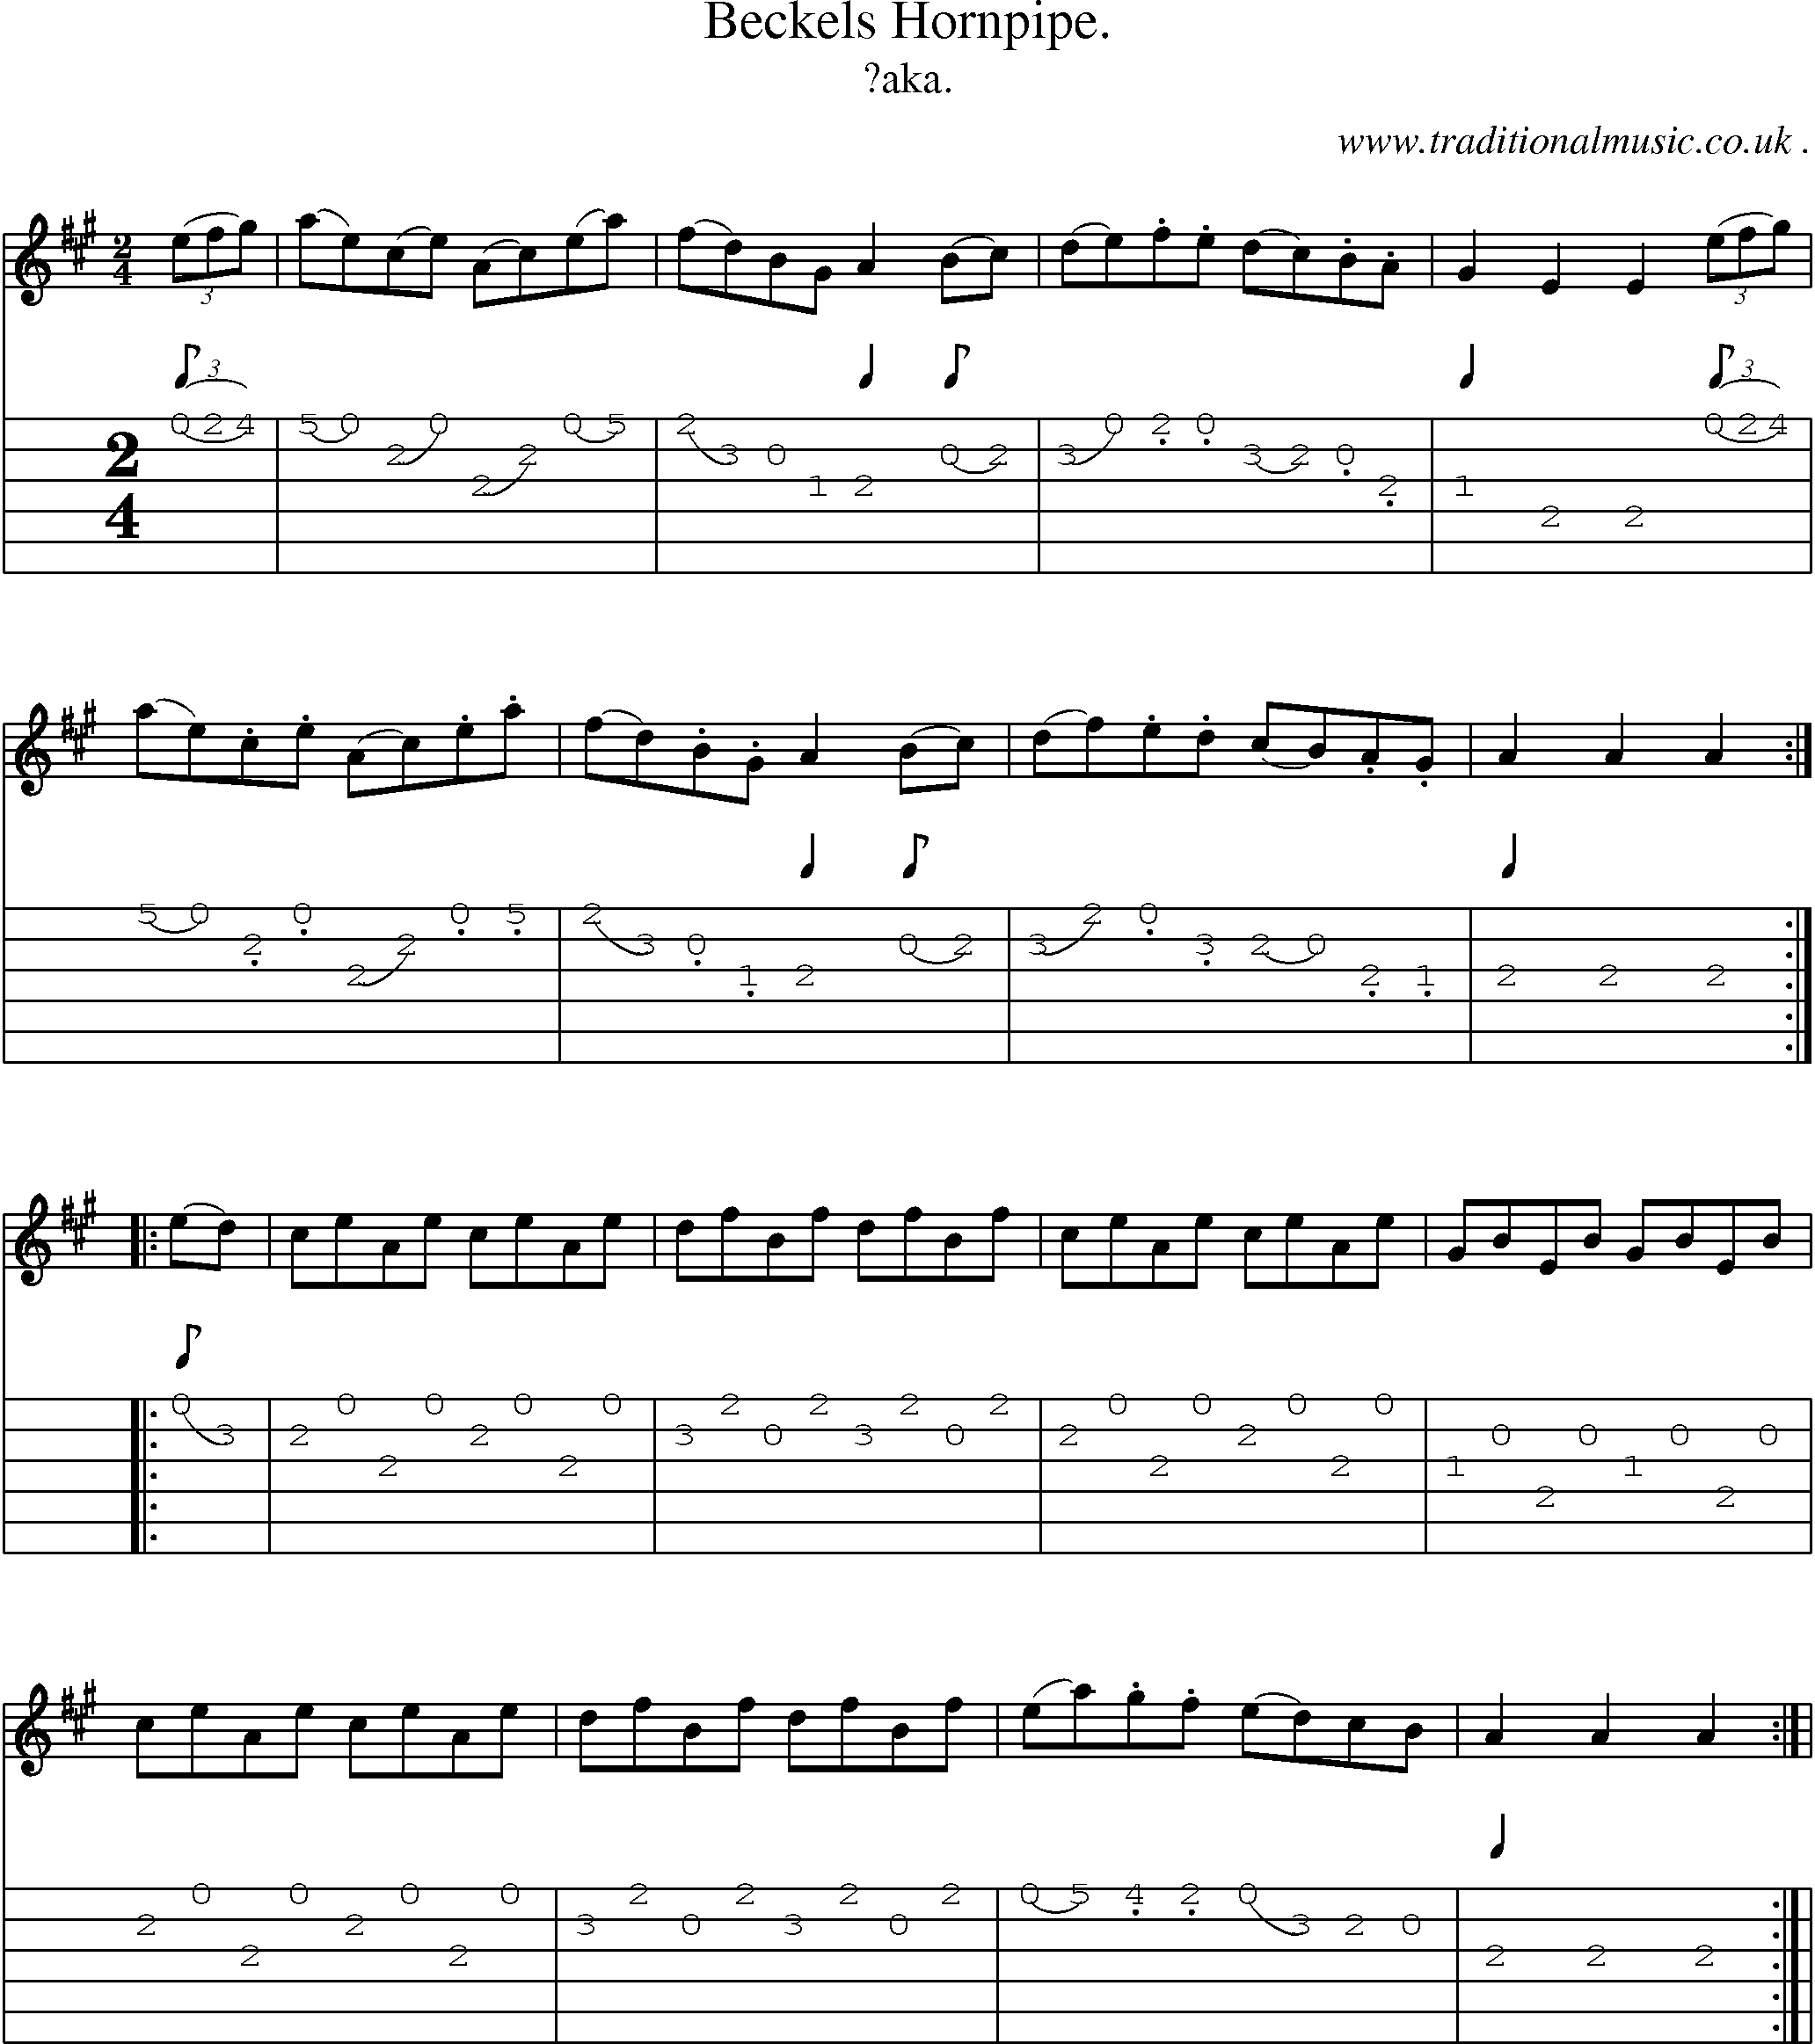 Sheet-Music and Guitar Tabs for Beckels Hornpipe